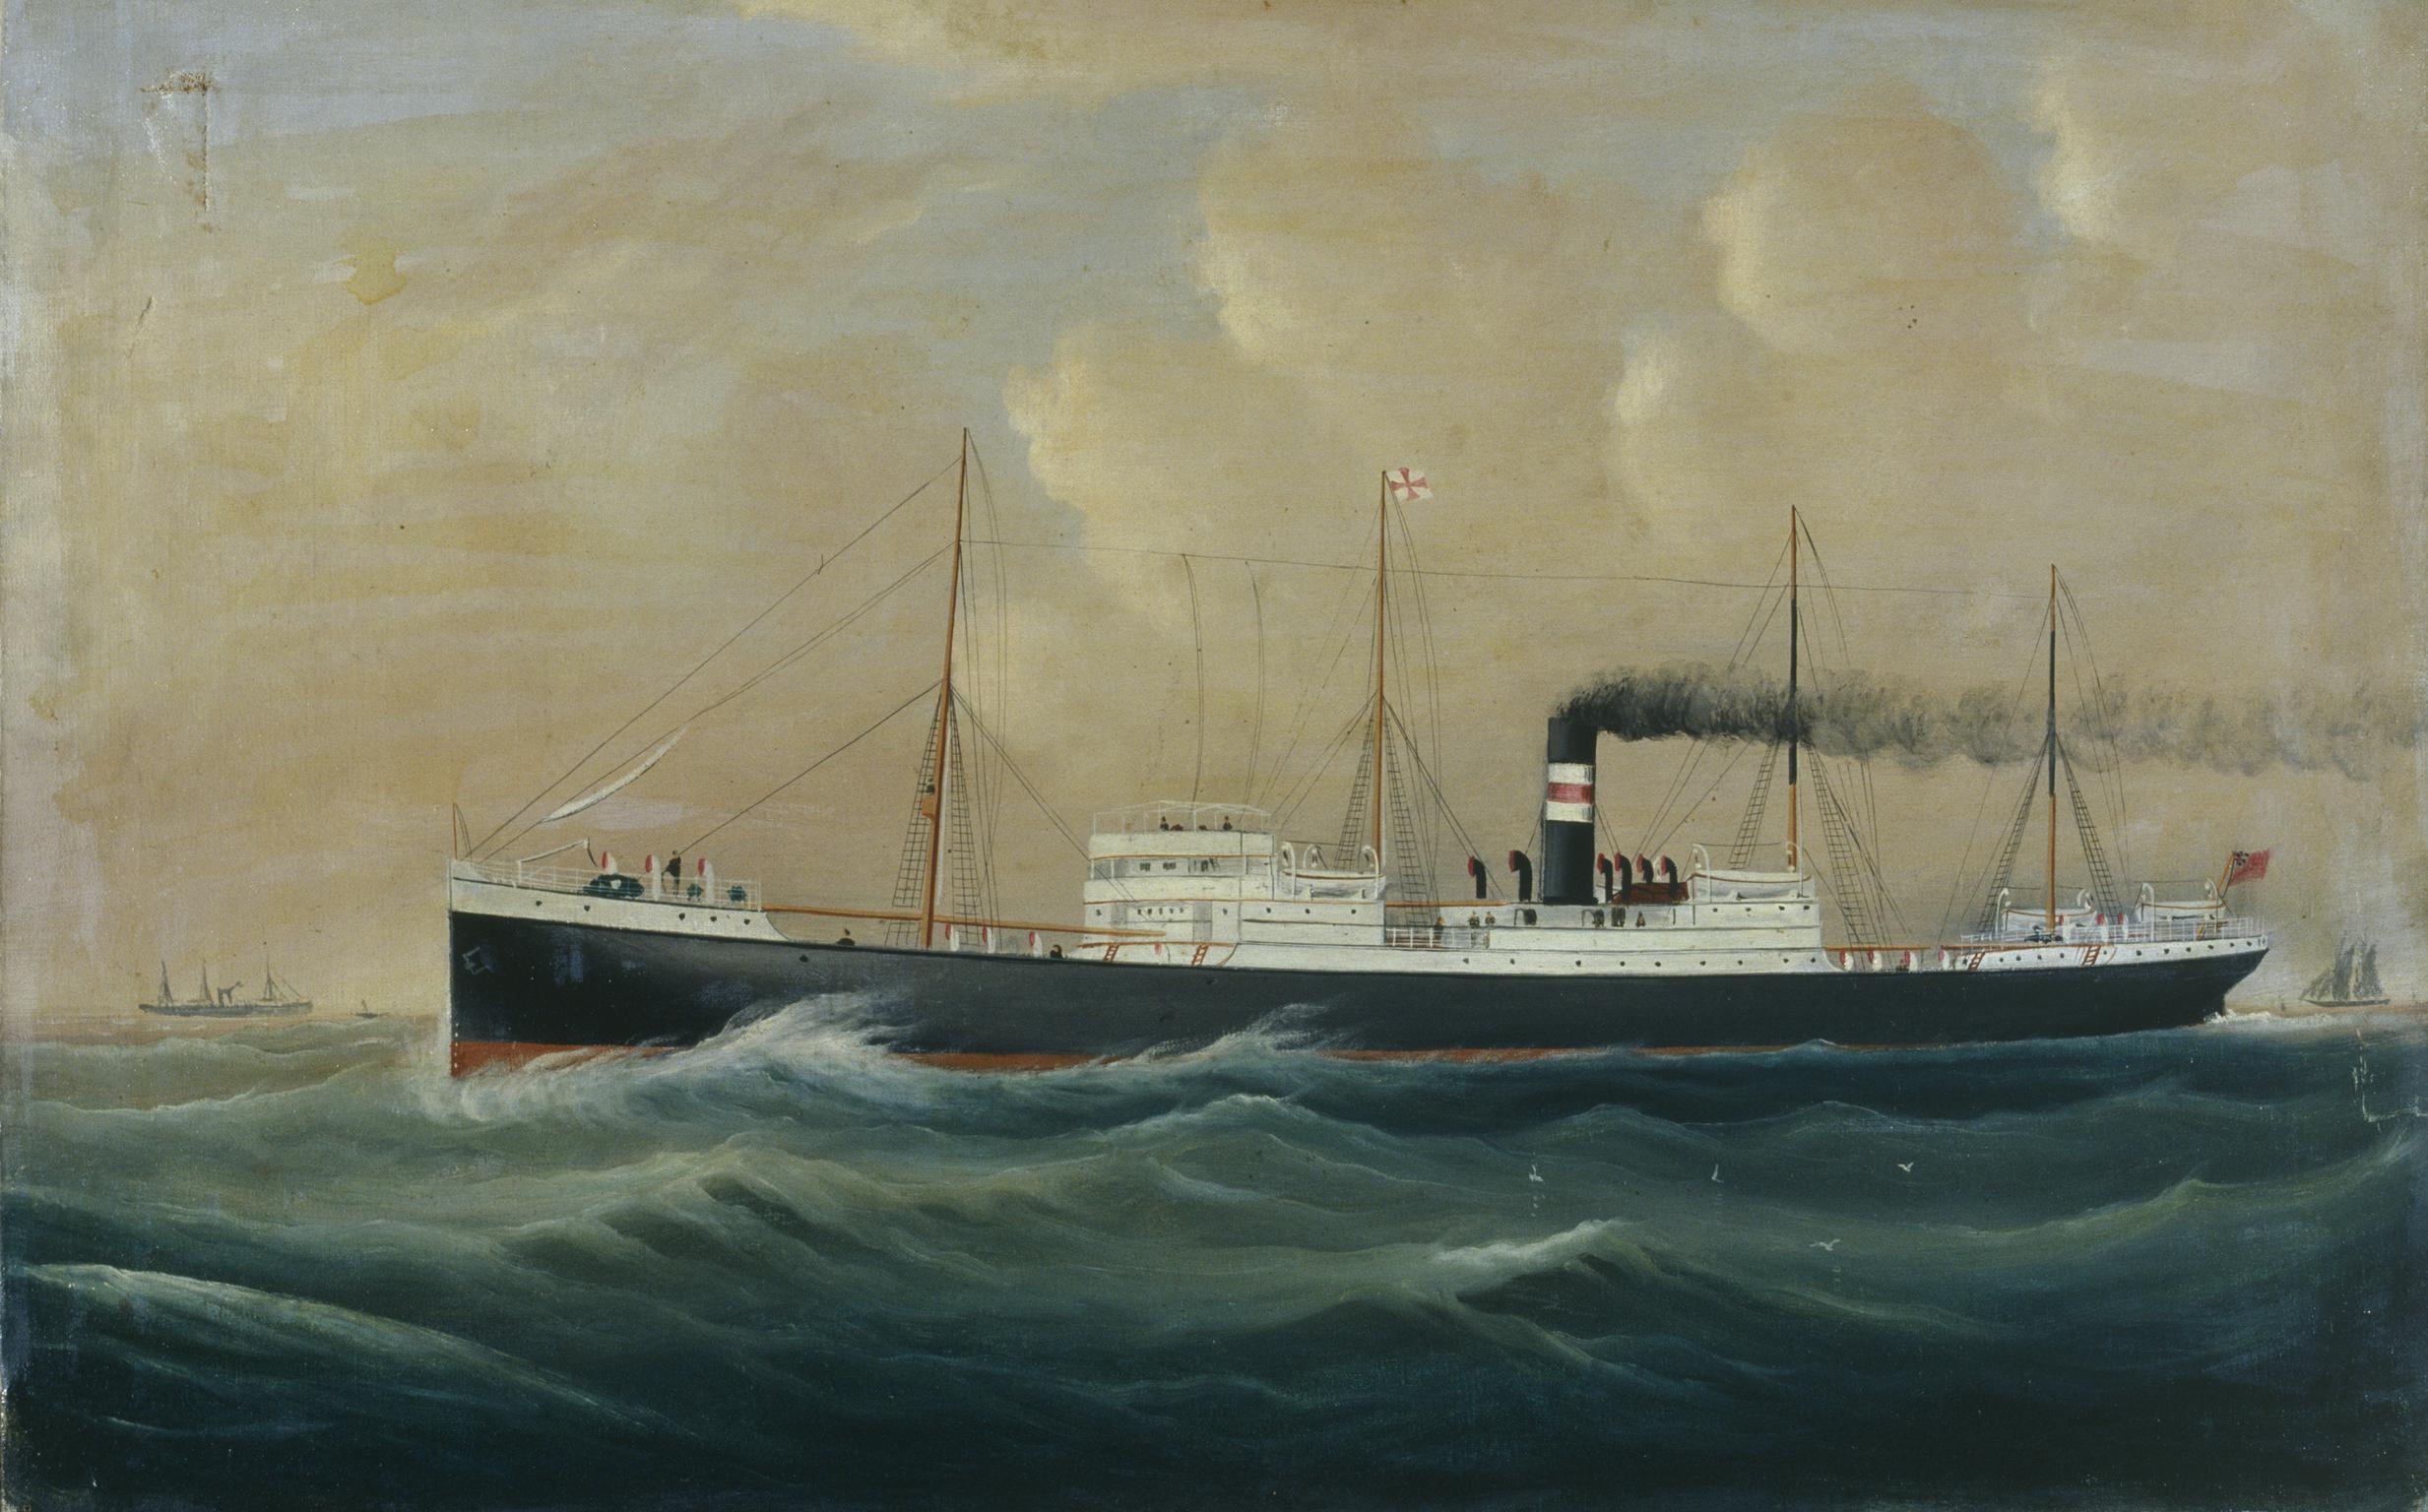 Unidentified steamer of the Harrison Line, paint